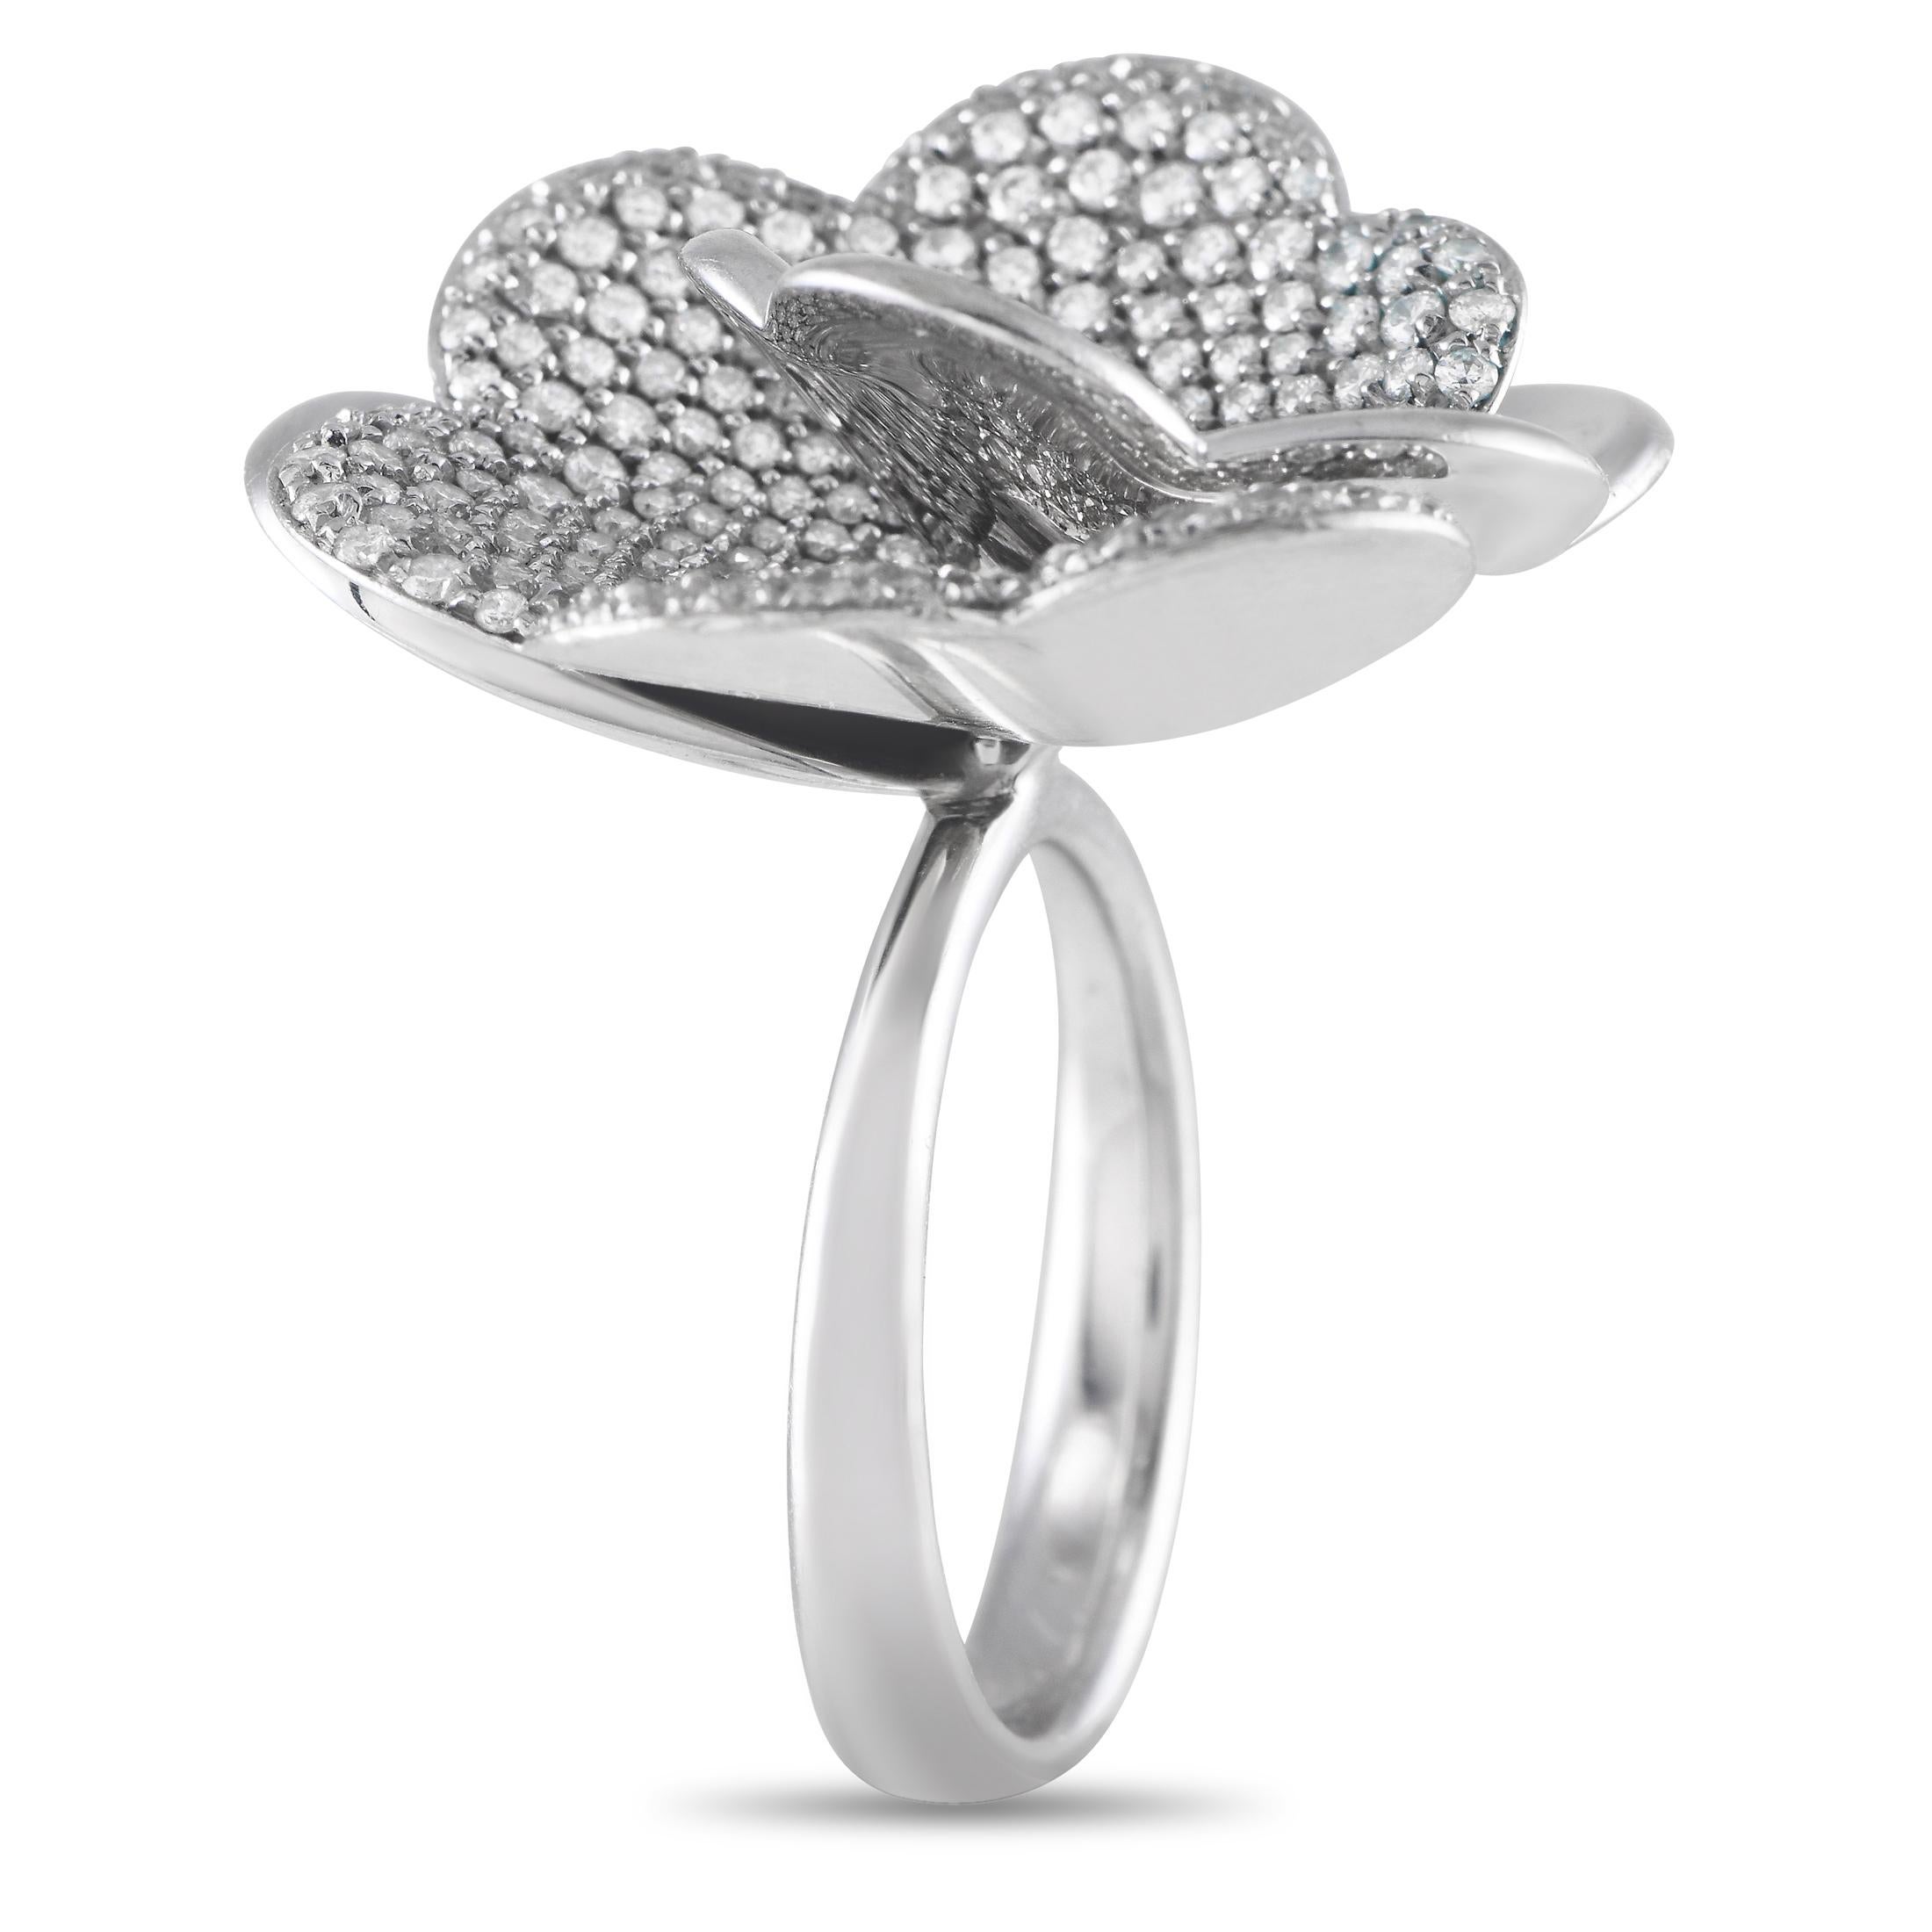 The celebrated Italian goldsmithing tradition is highly evident in this piece of high jewelry by Giorgio Visconti. The ring is handmade in 18K white gold and decorated with a floral motif detailed with multiple petal layers in diamond pav and